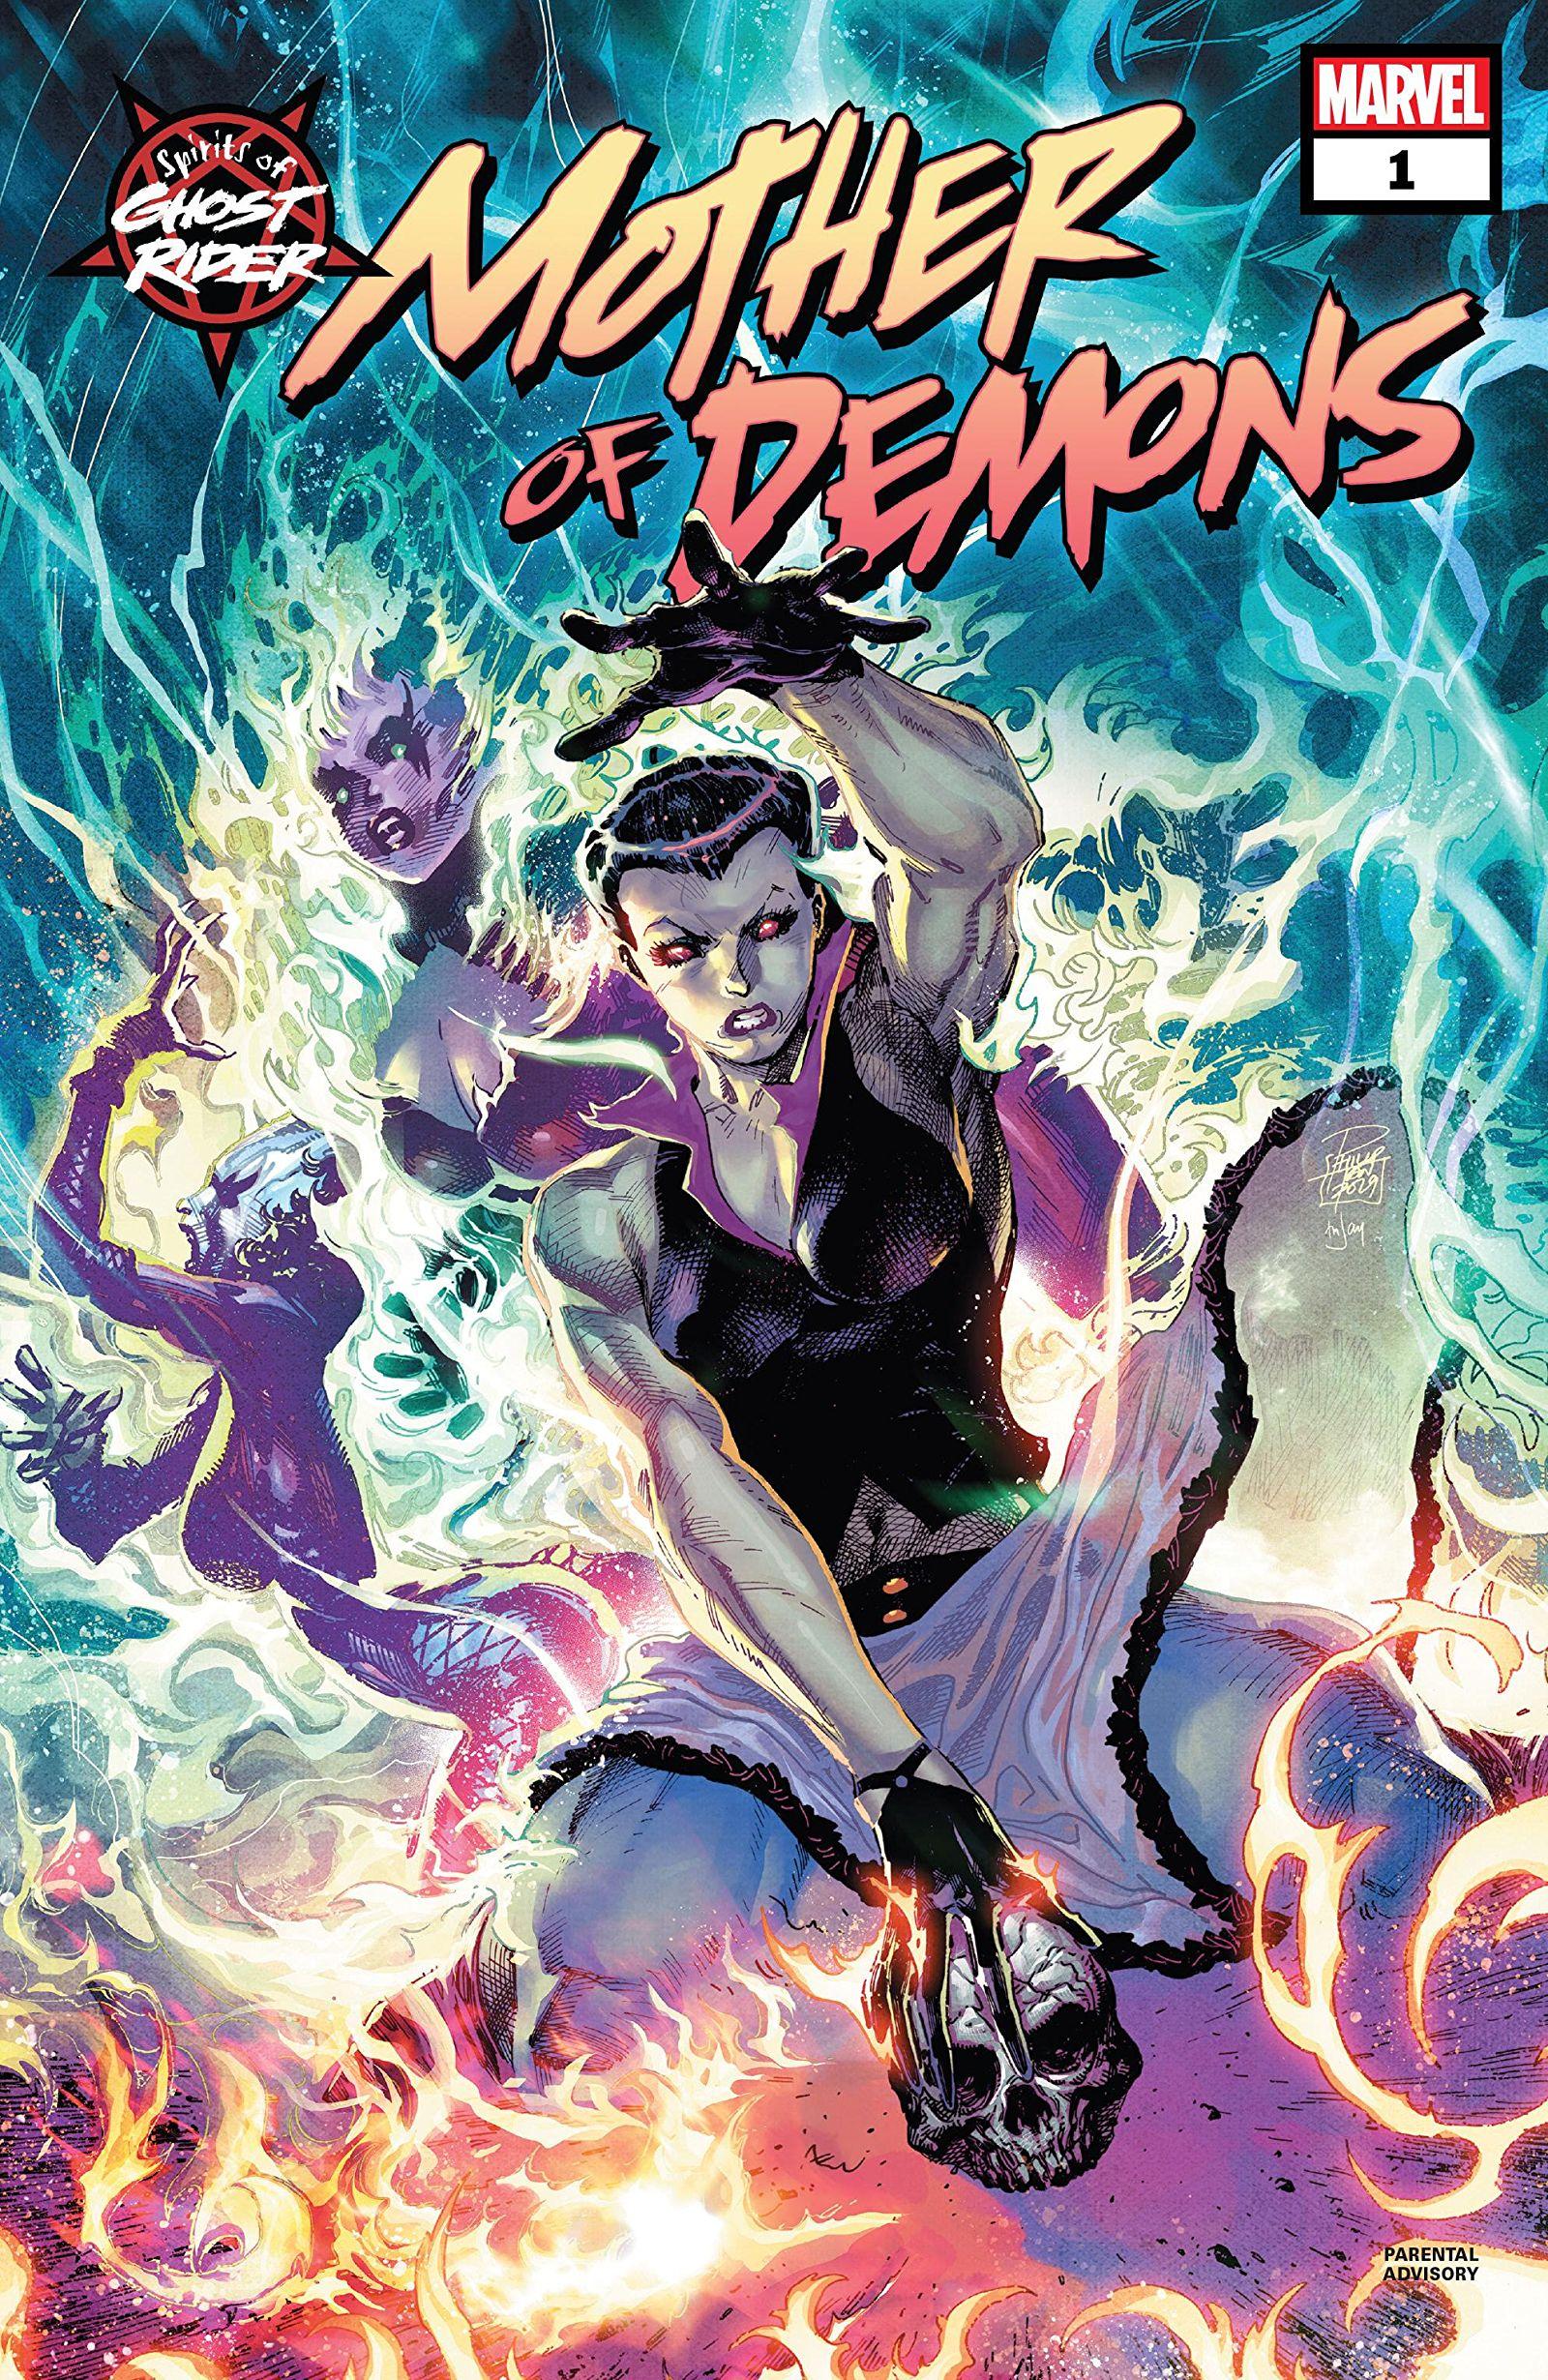 Spirits of Ghost Rider: Mother of Demons Vol. 1 #1